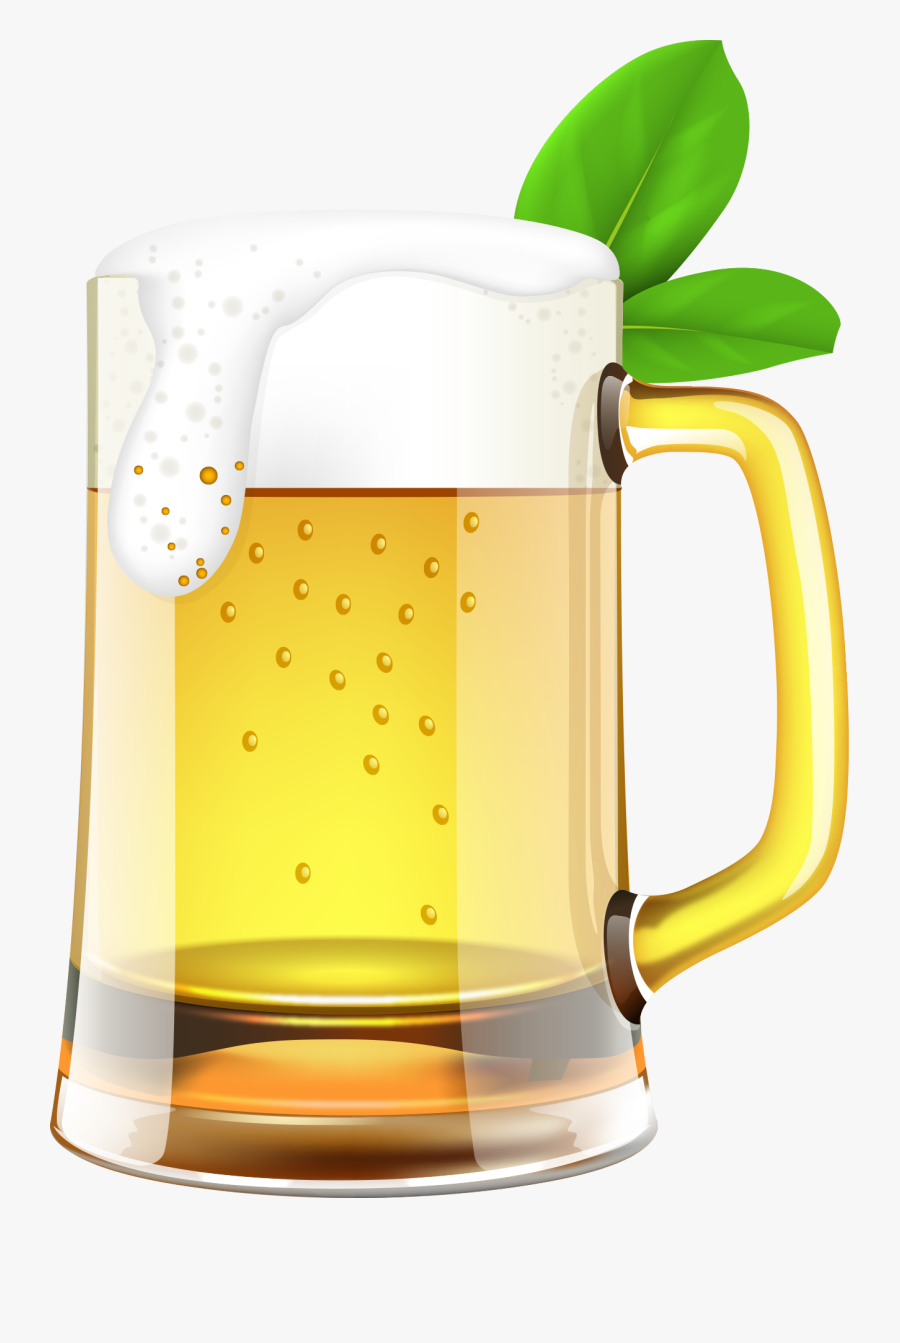 Beer Cup Computer File - Beer Cup Png, Transparent Clipart